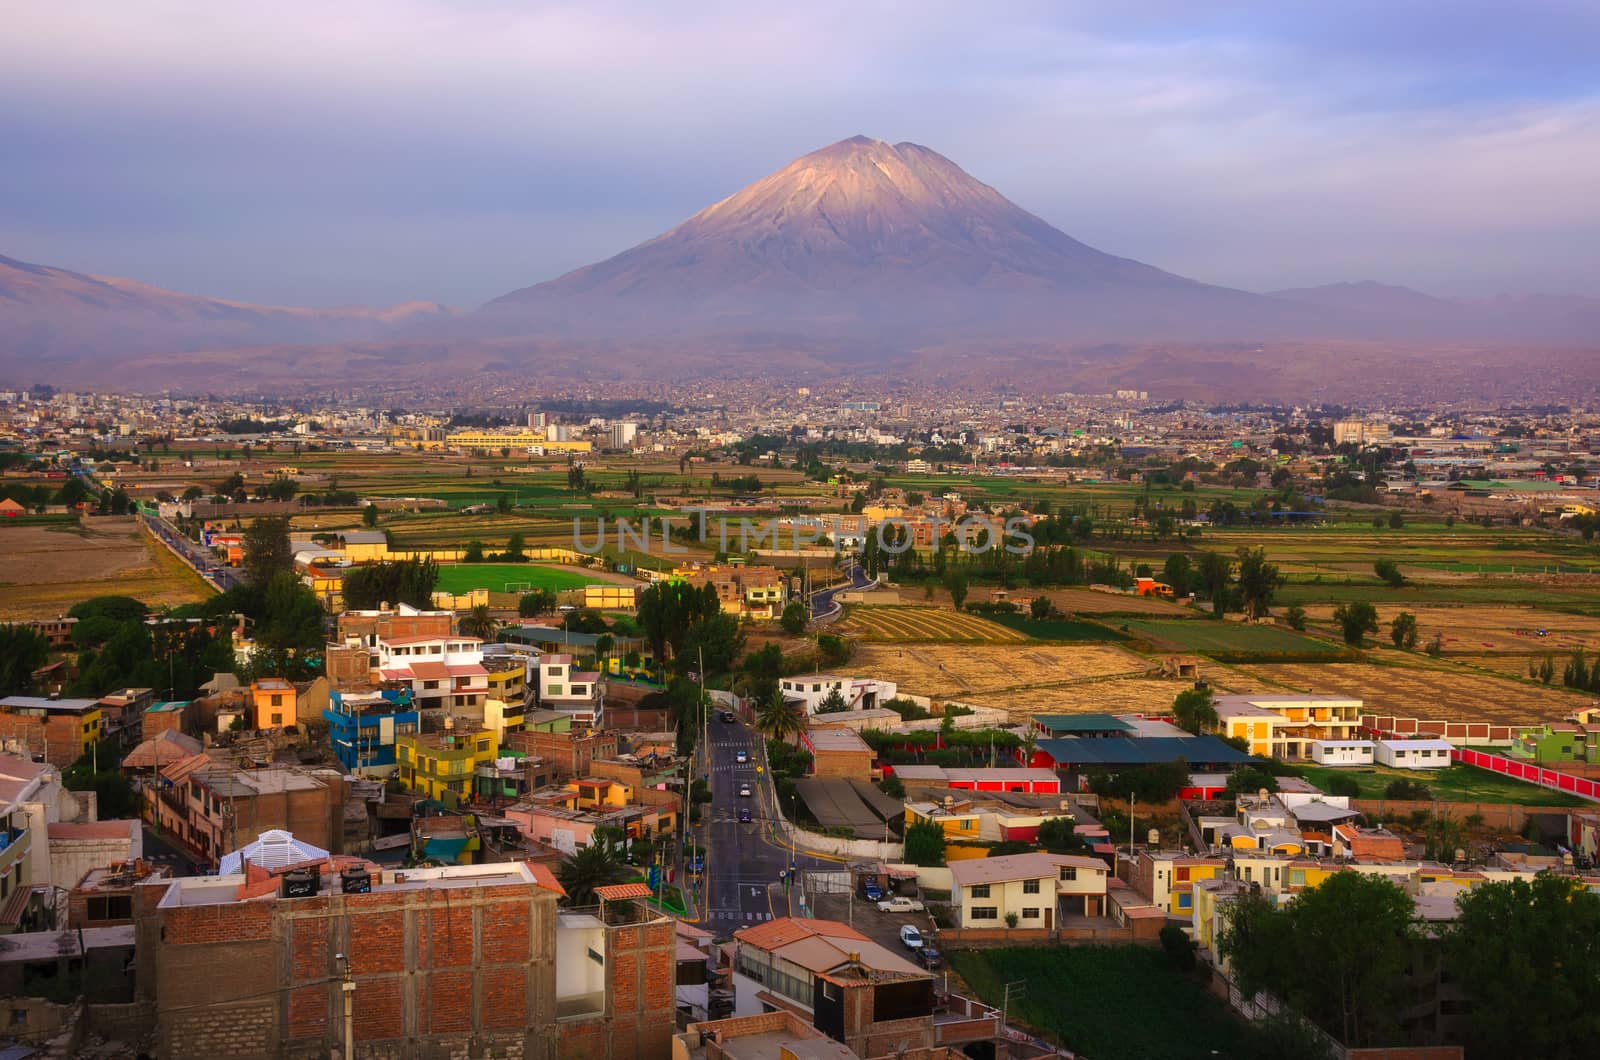 The Sachaca district is one of Arequipa's district in Peru.